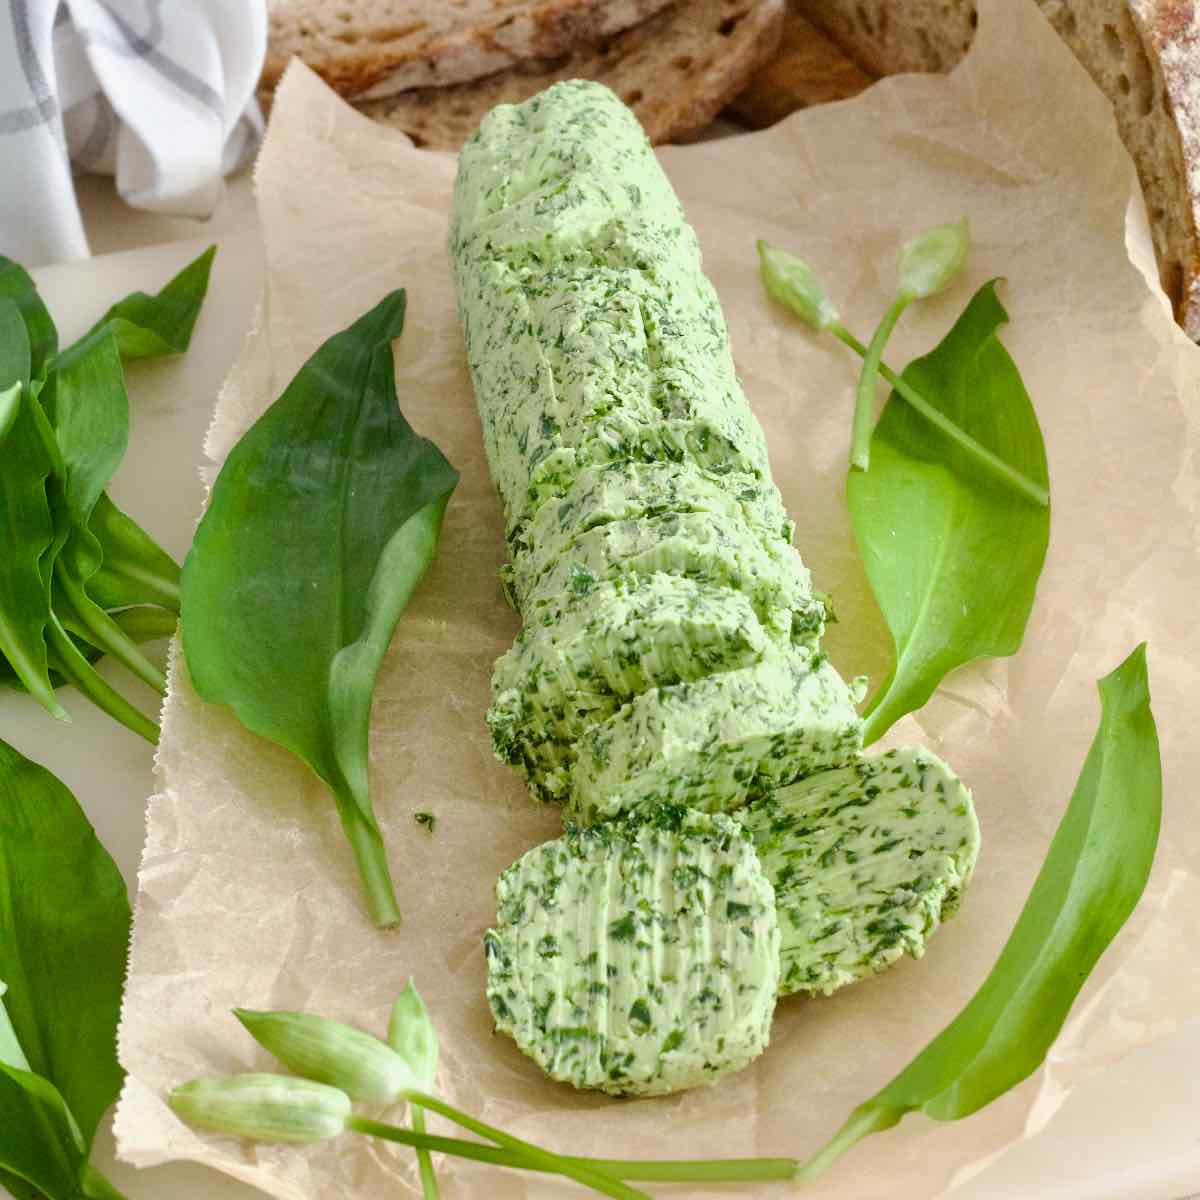 Wild garlic butter log with garlic leaves and flowers scattered around it.